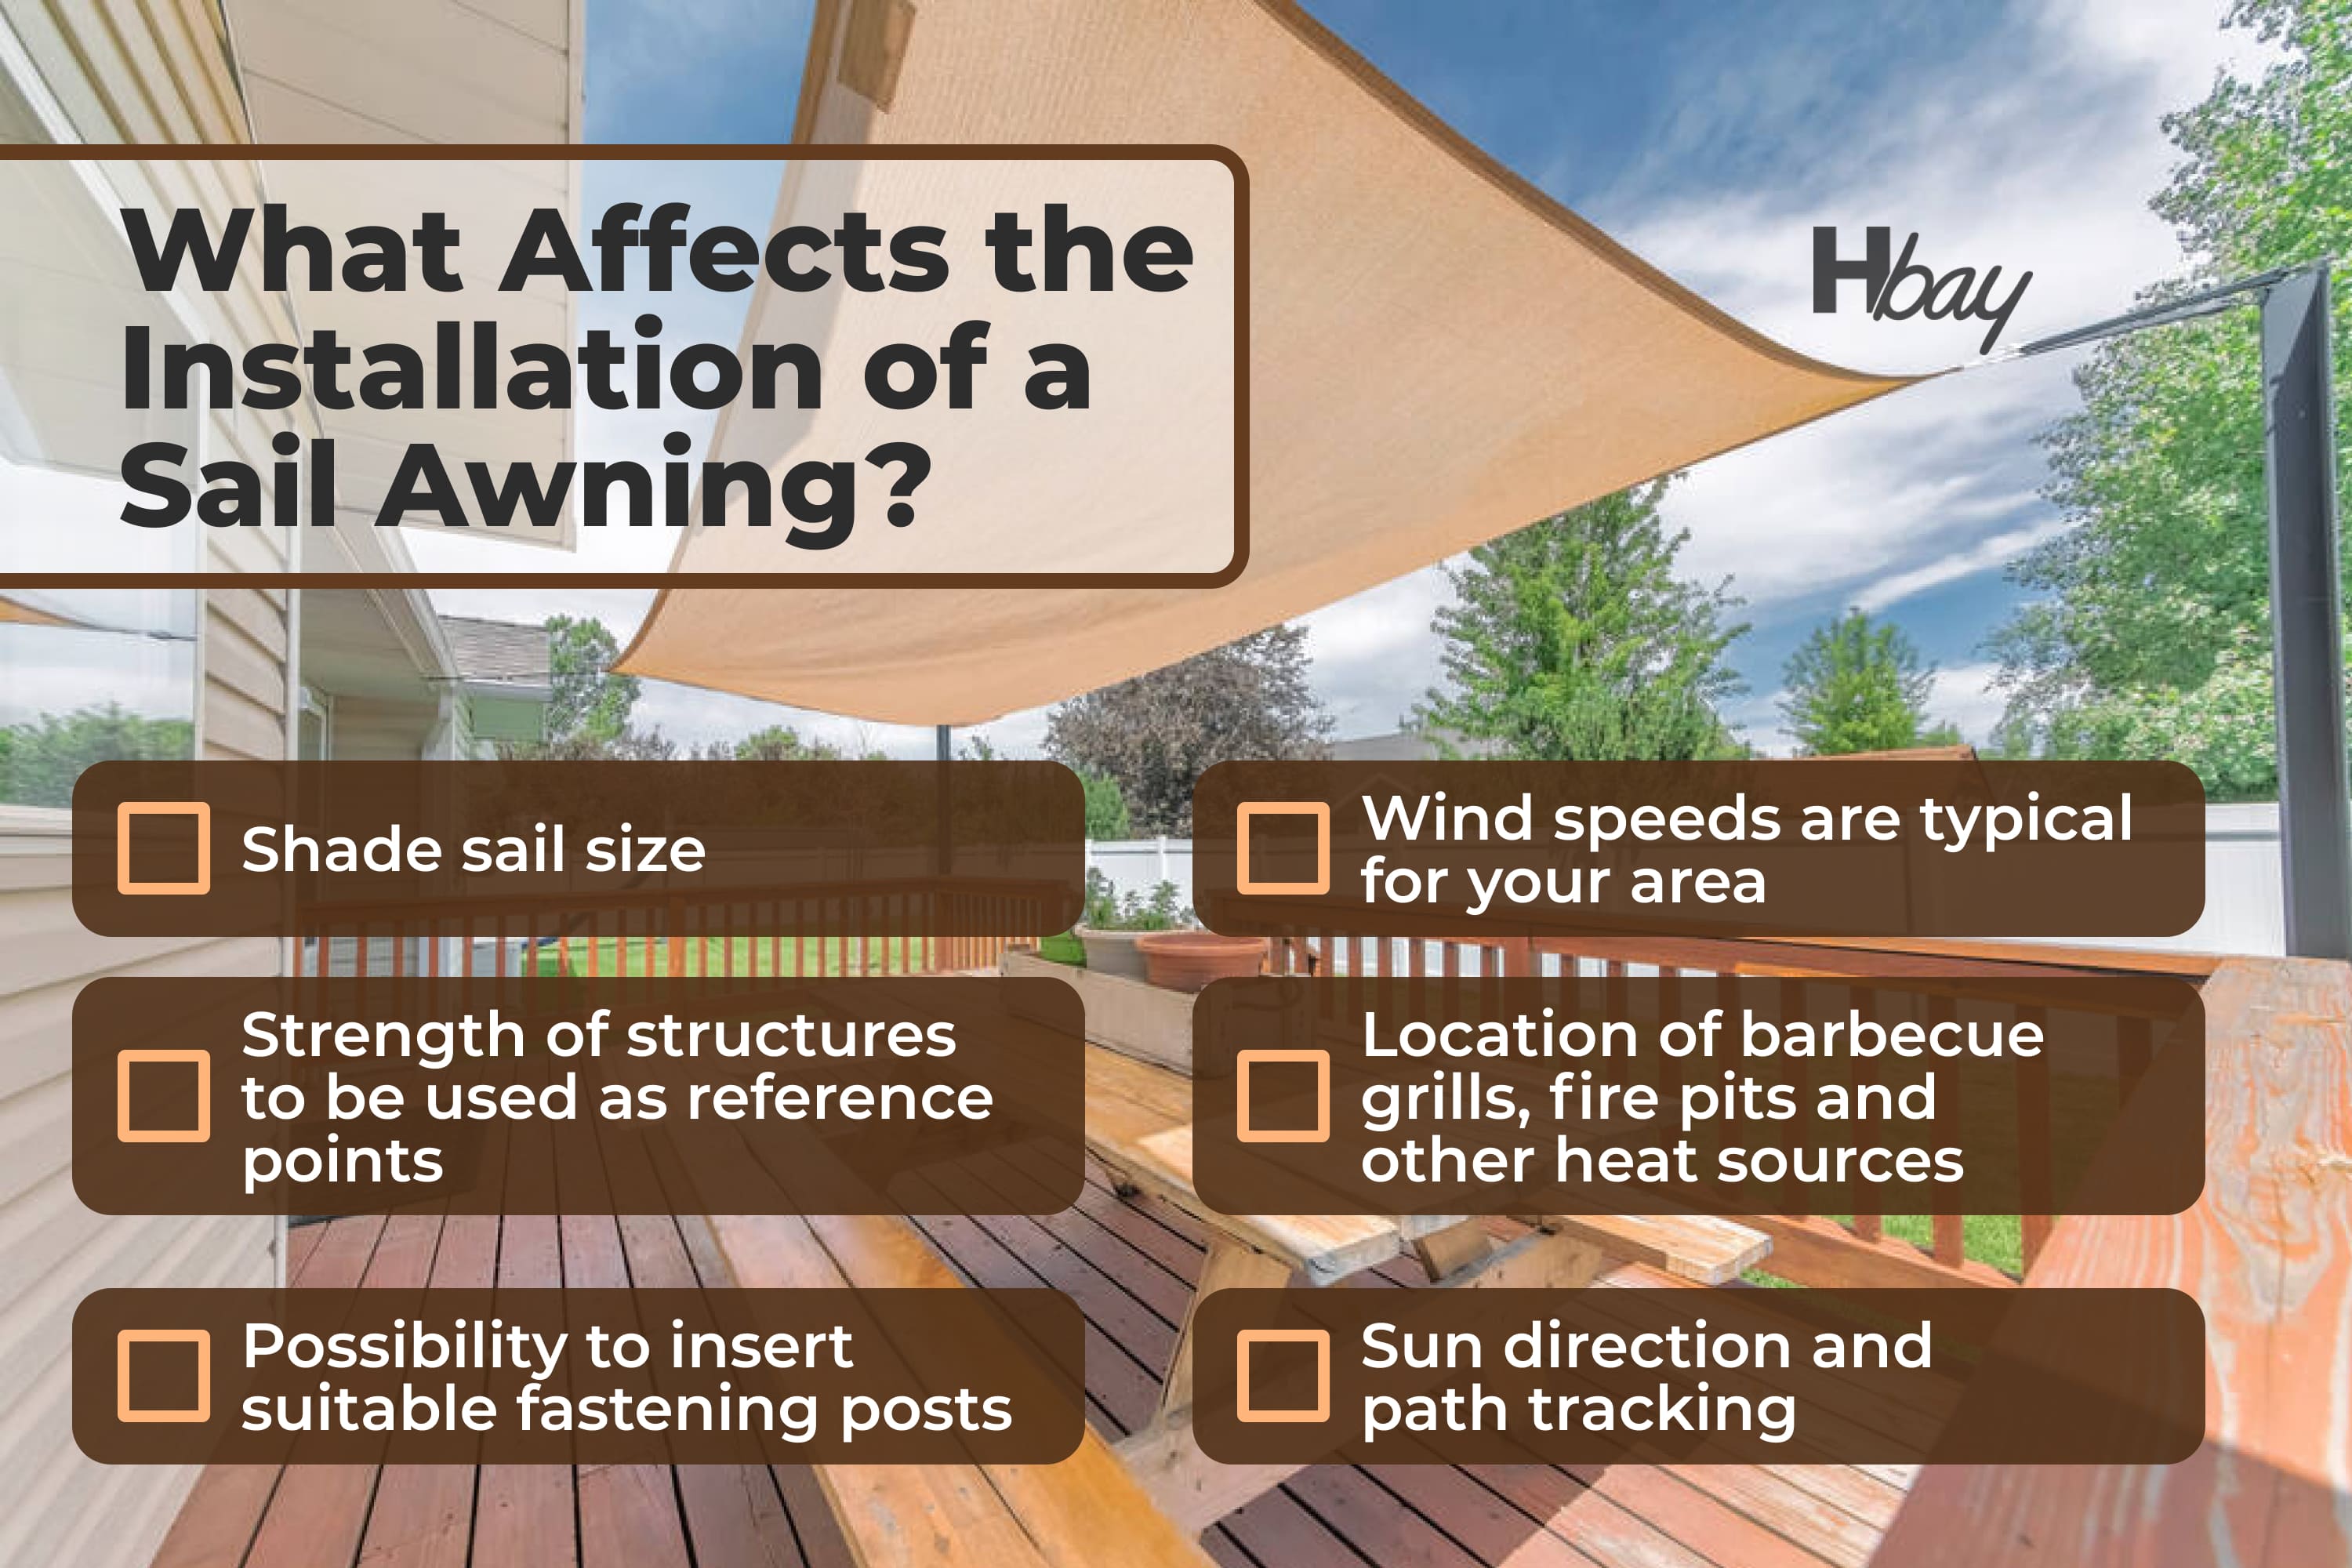 What affects the installation of a sail awning